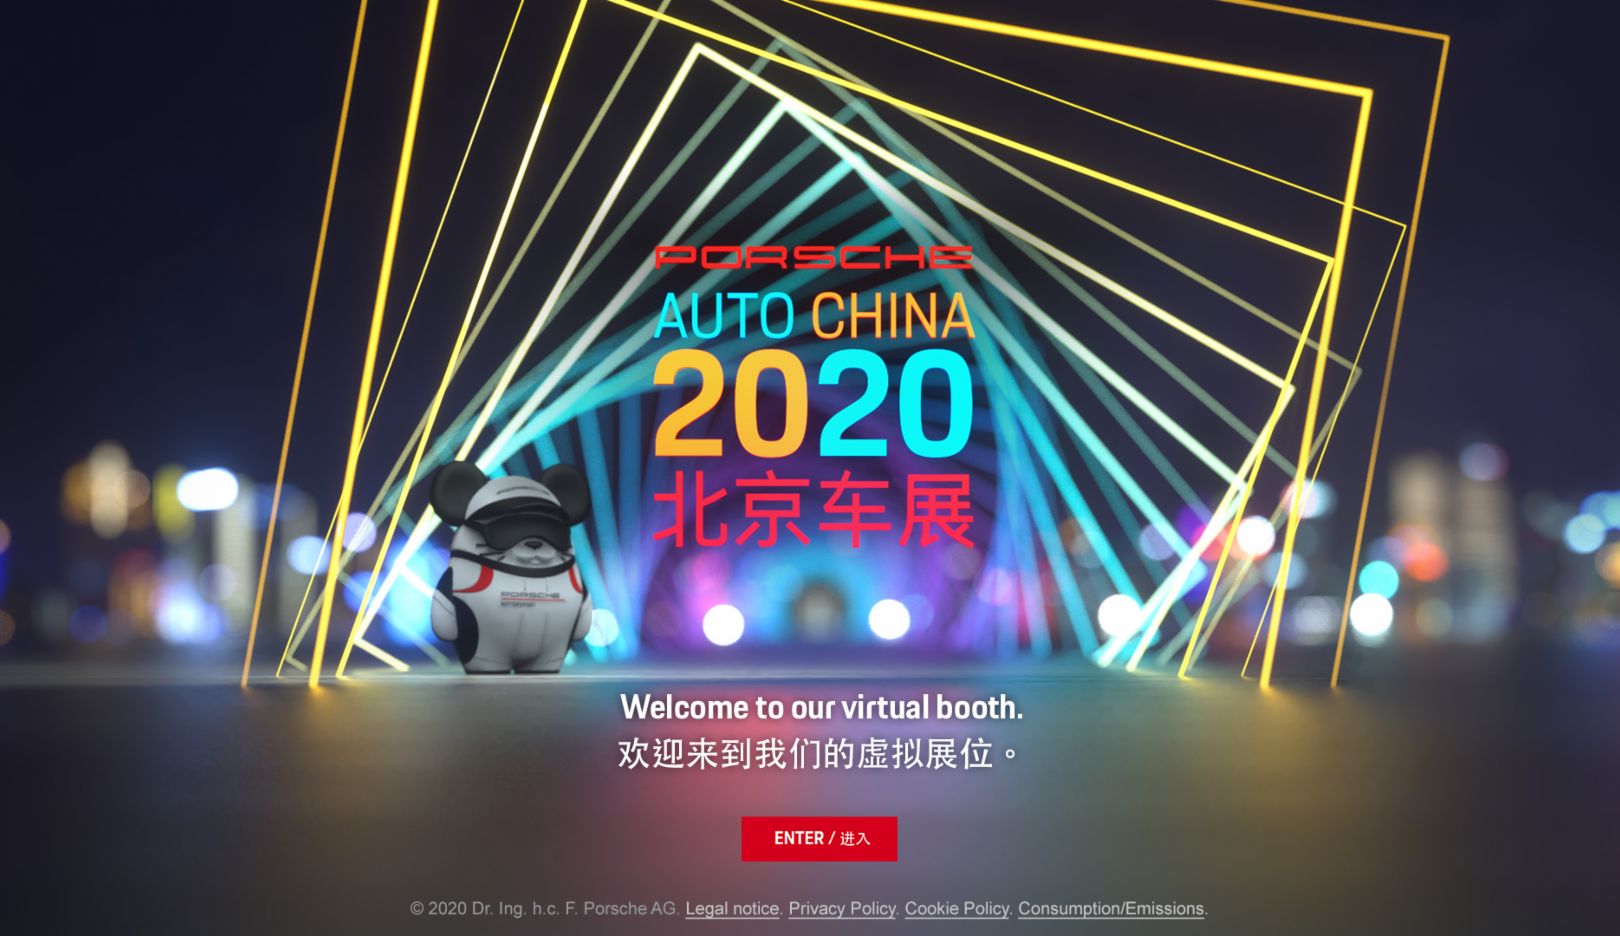 Real and virtual presence at the Beijing Auto Show